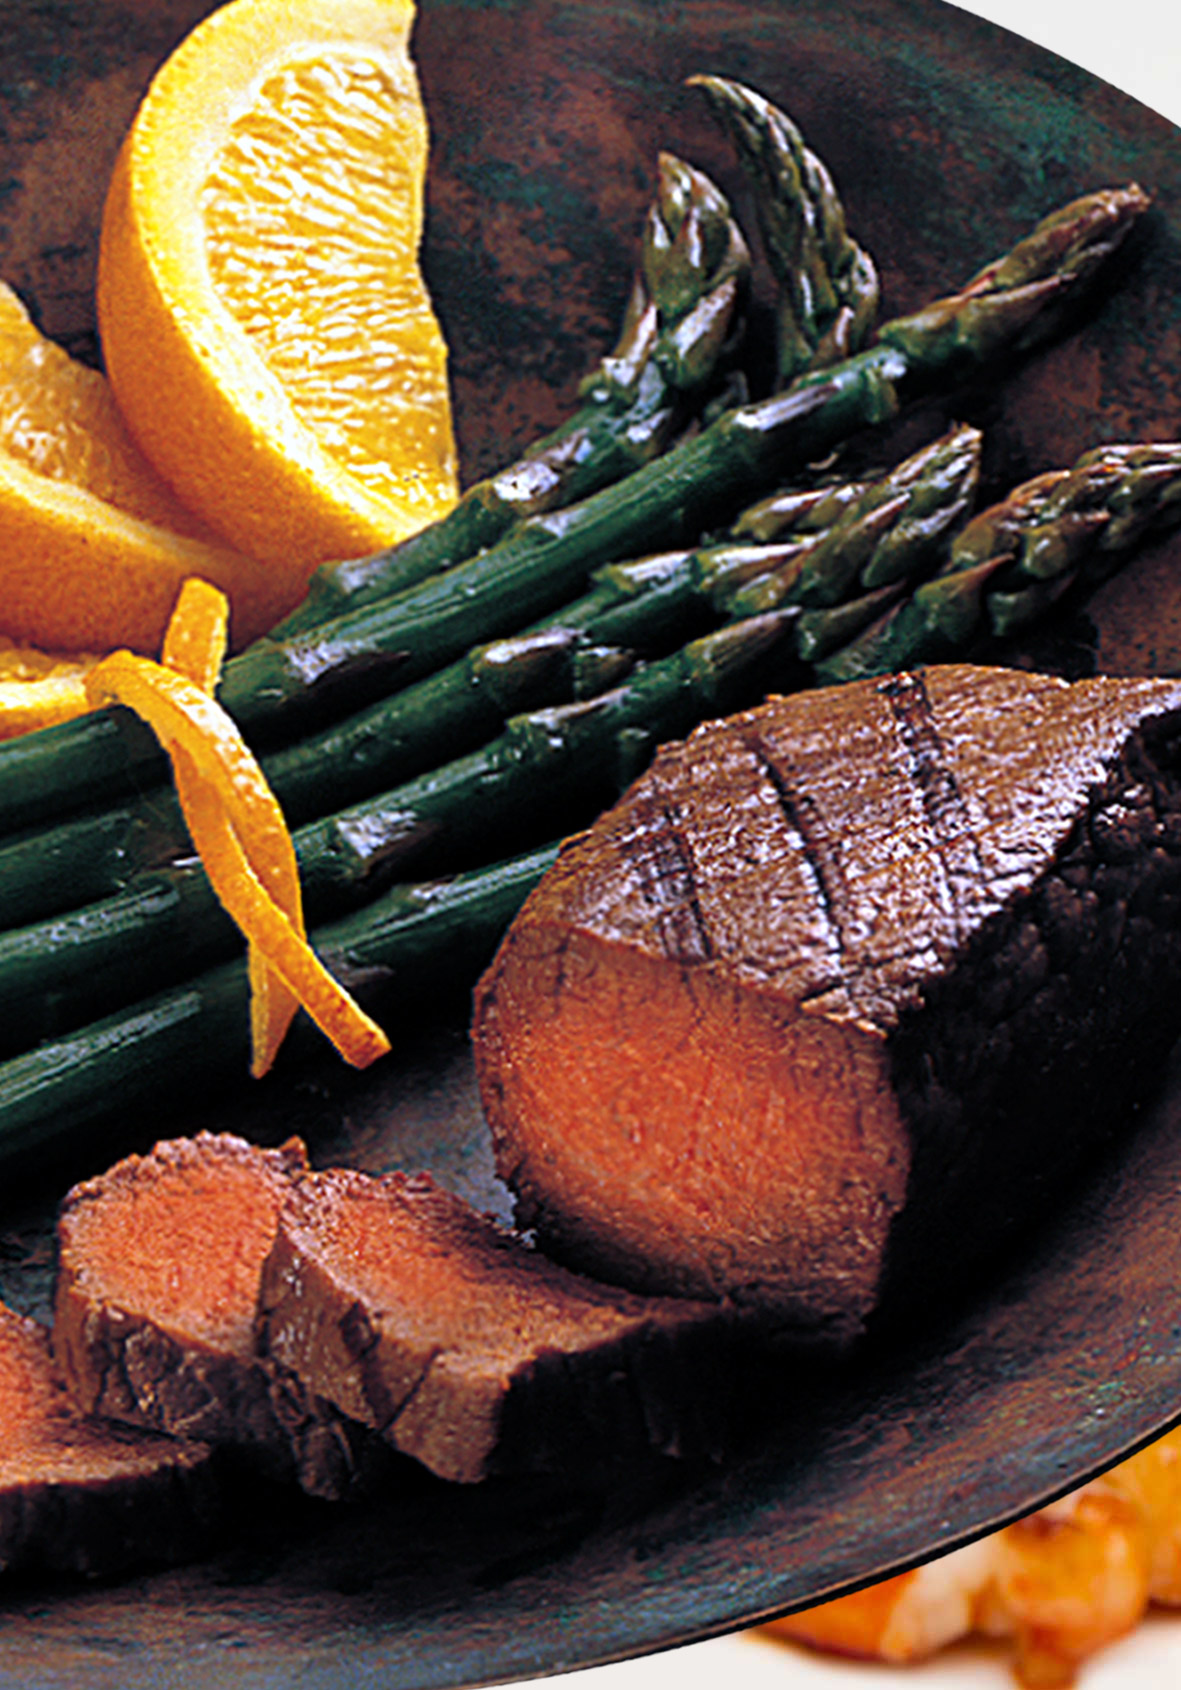 OSTRICH STEAK WITH ASPARAGUS ON A PLATE